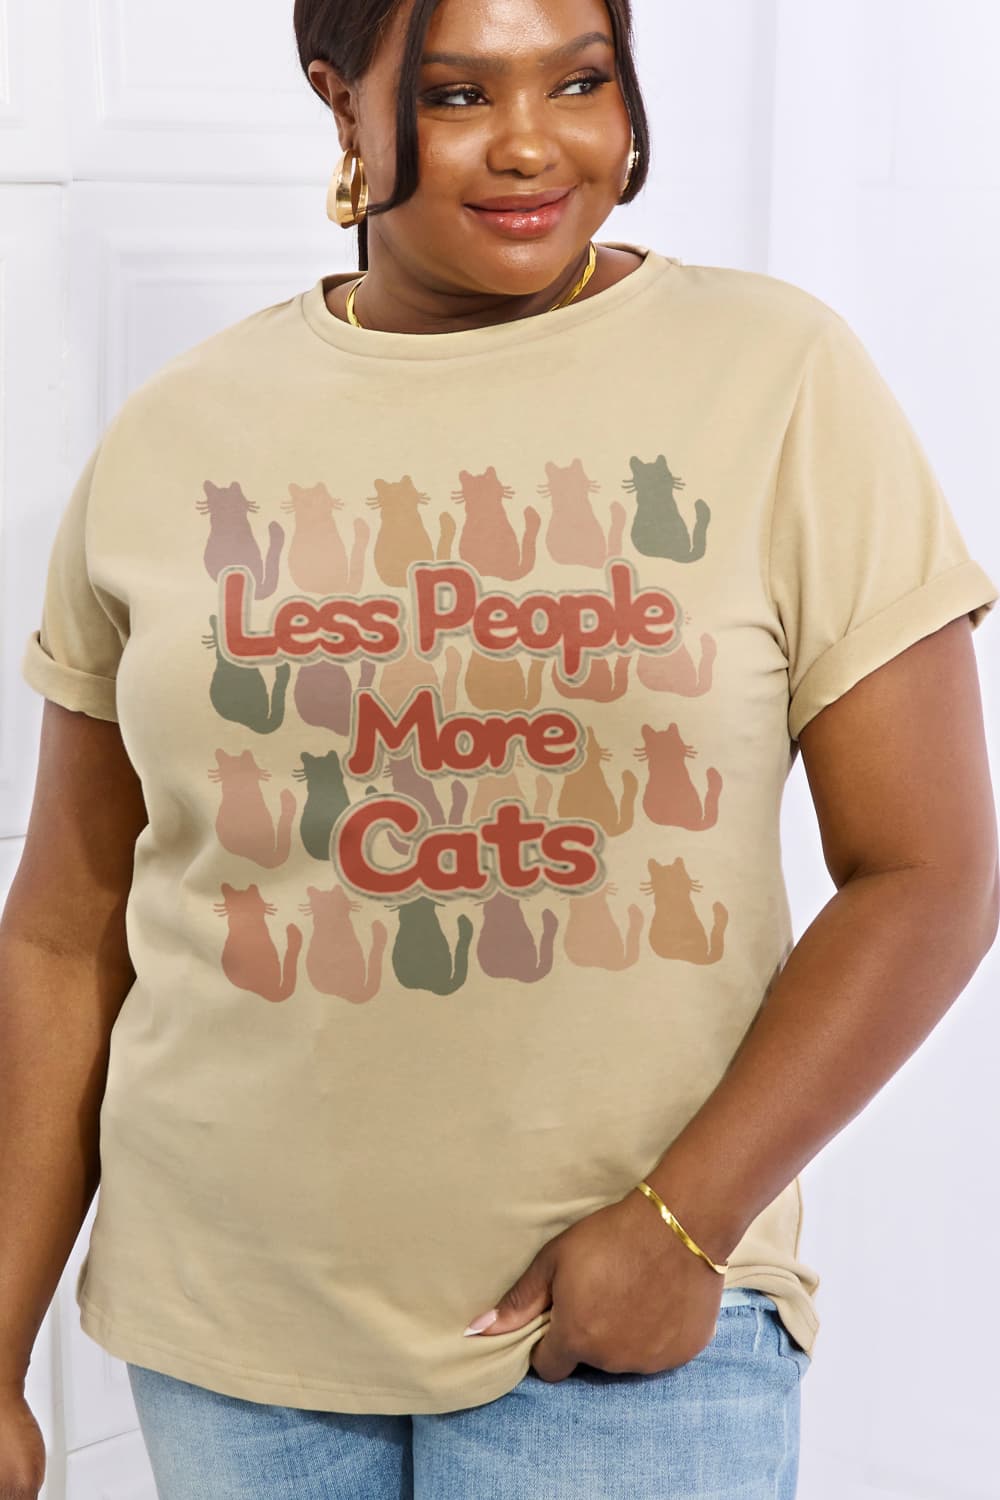 LESS PEOPLE MORE CATS Graphic Cotton Tee - T-Shirts - Shirts & Tops - 11 - 2024